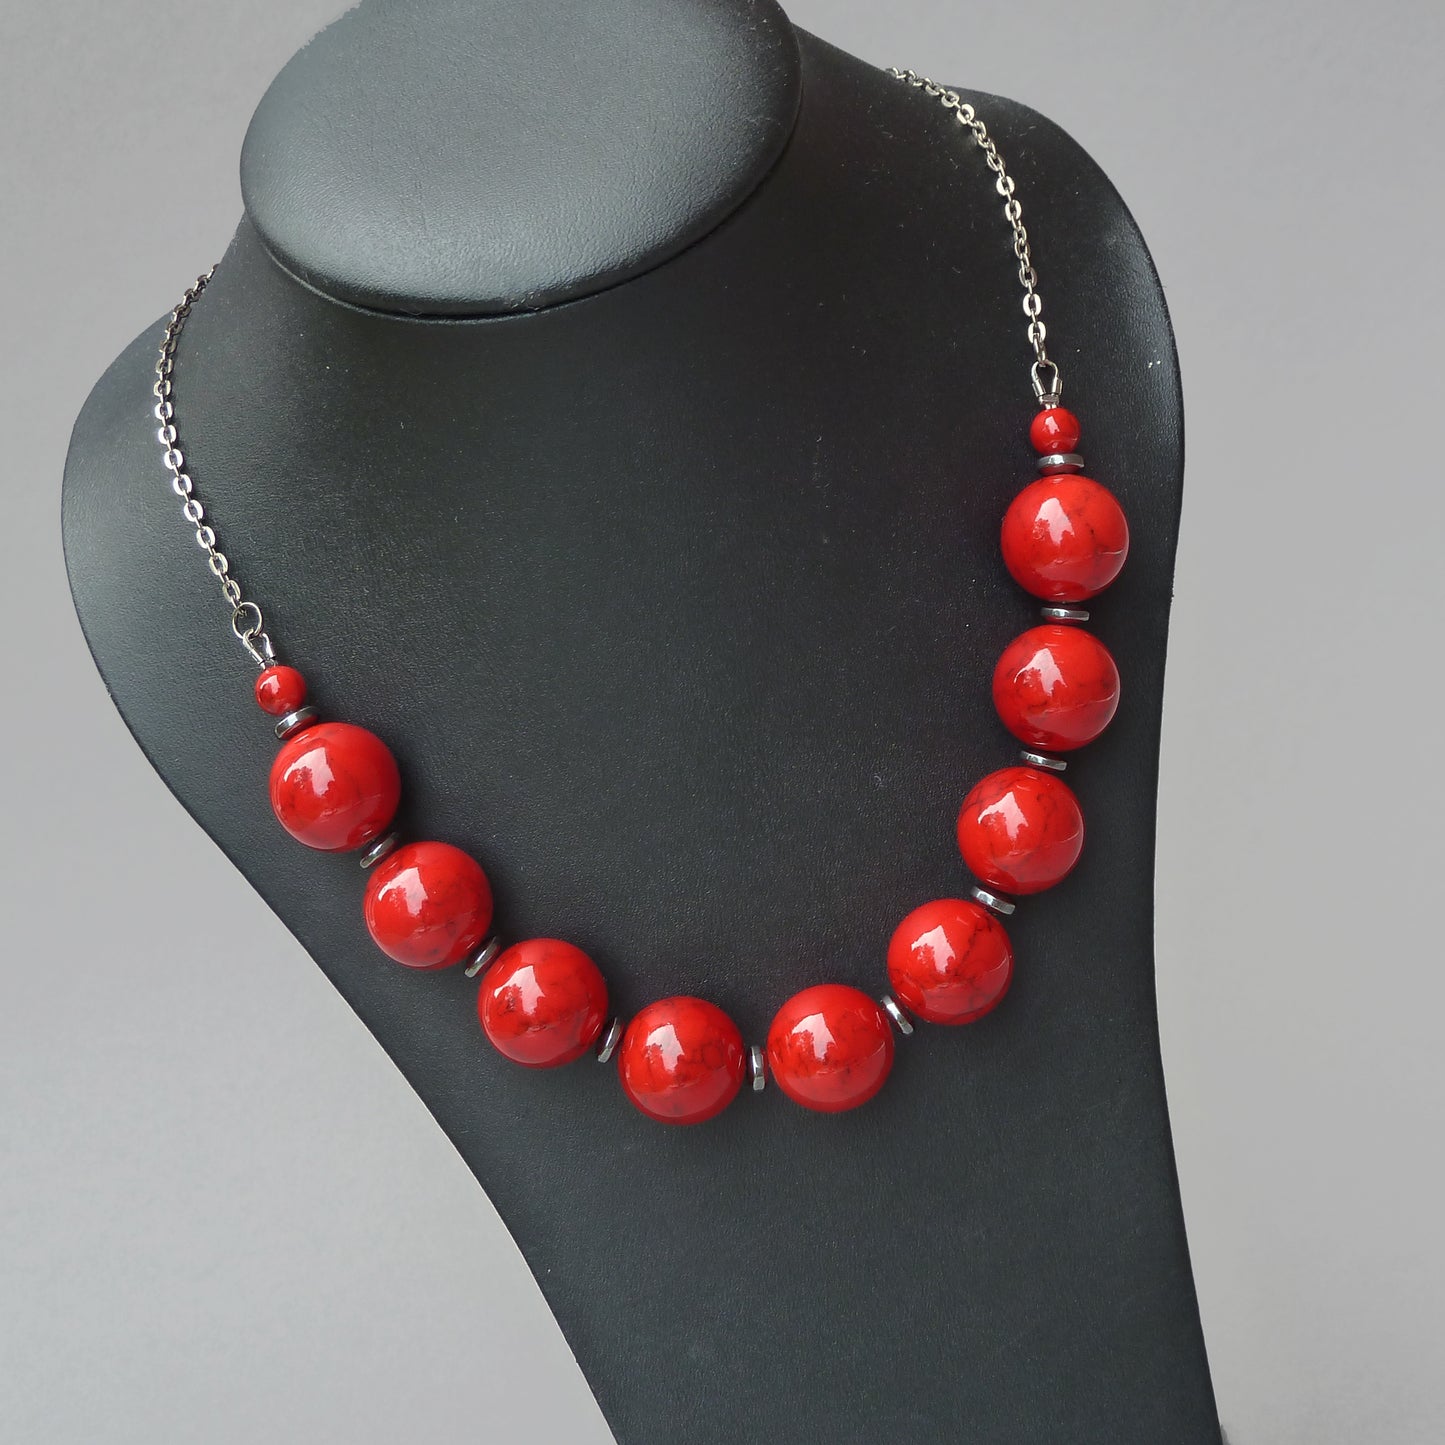 Chunky red beaded necklace